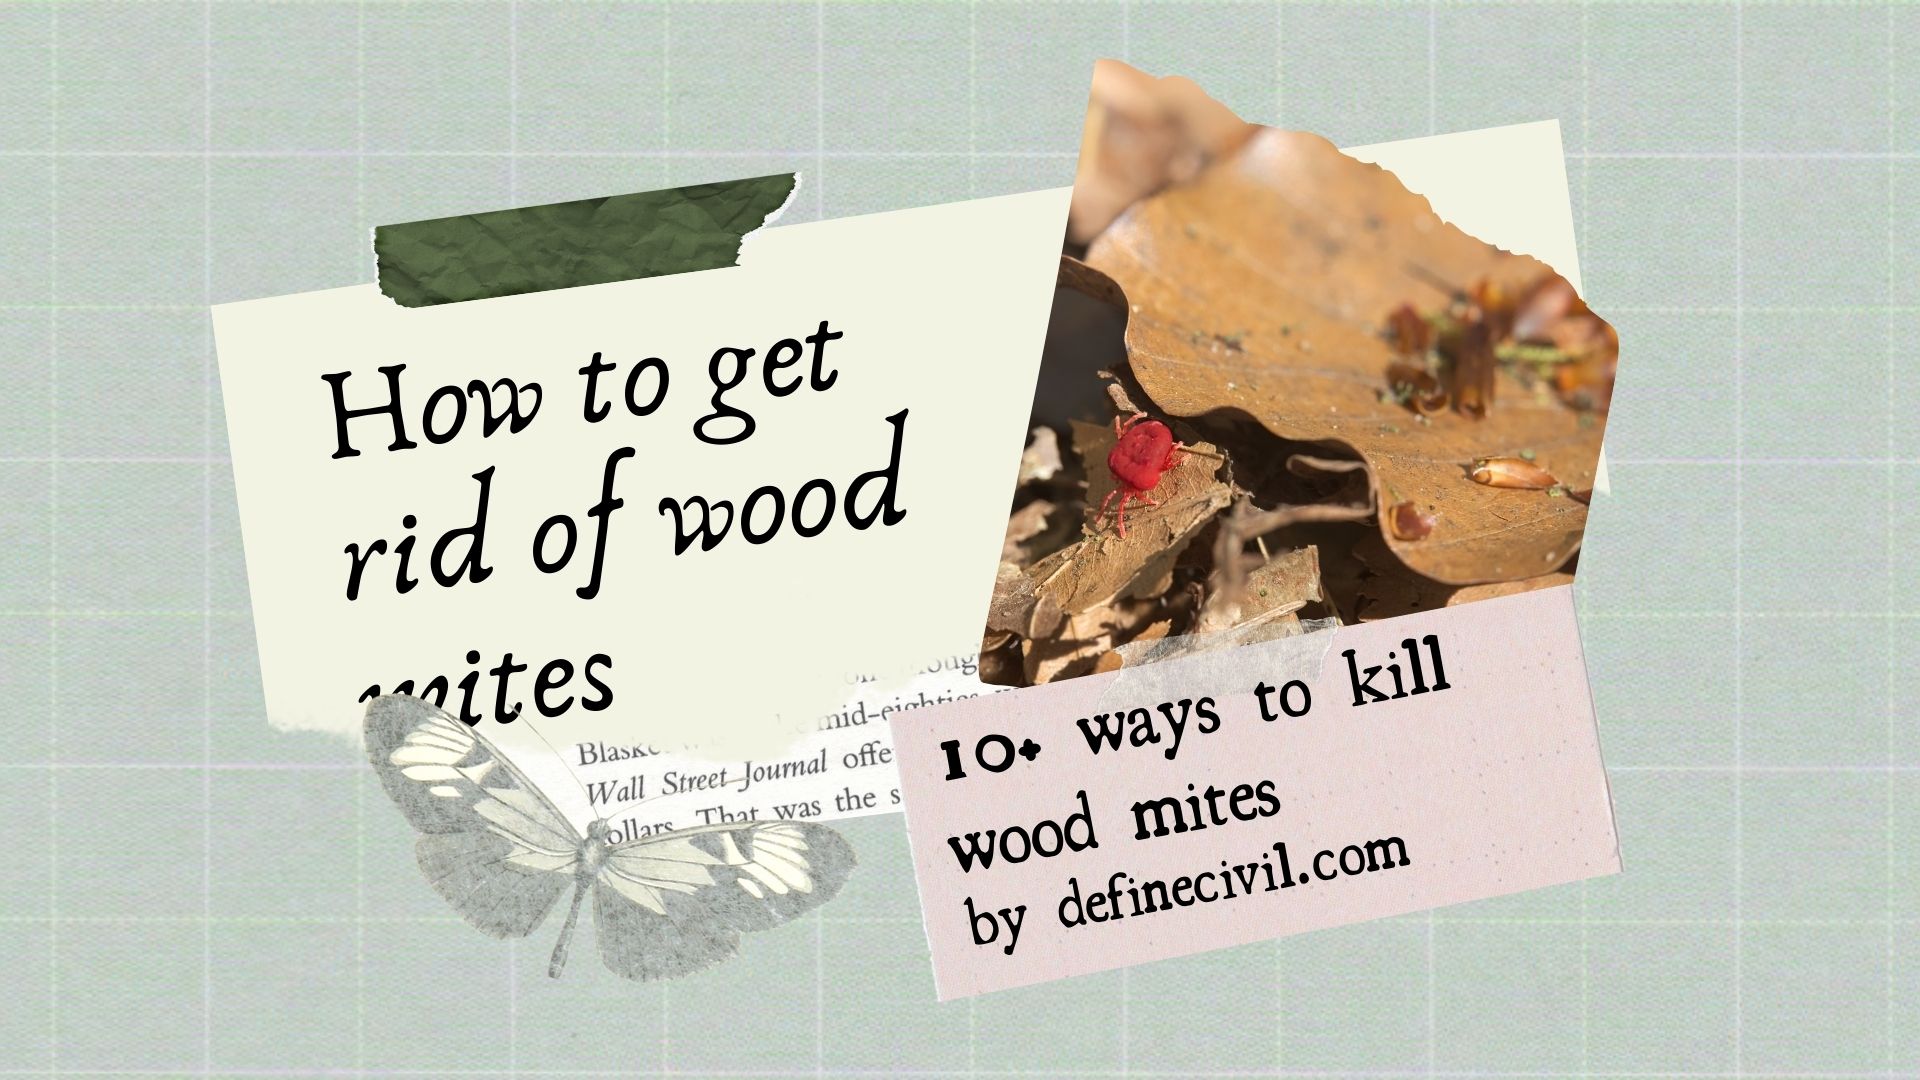 How to get rid of wood mites